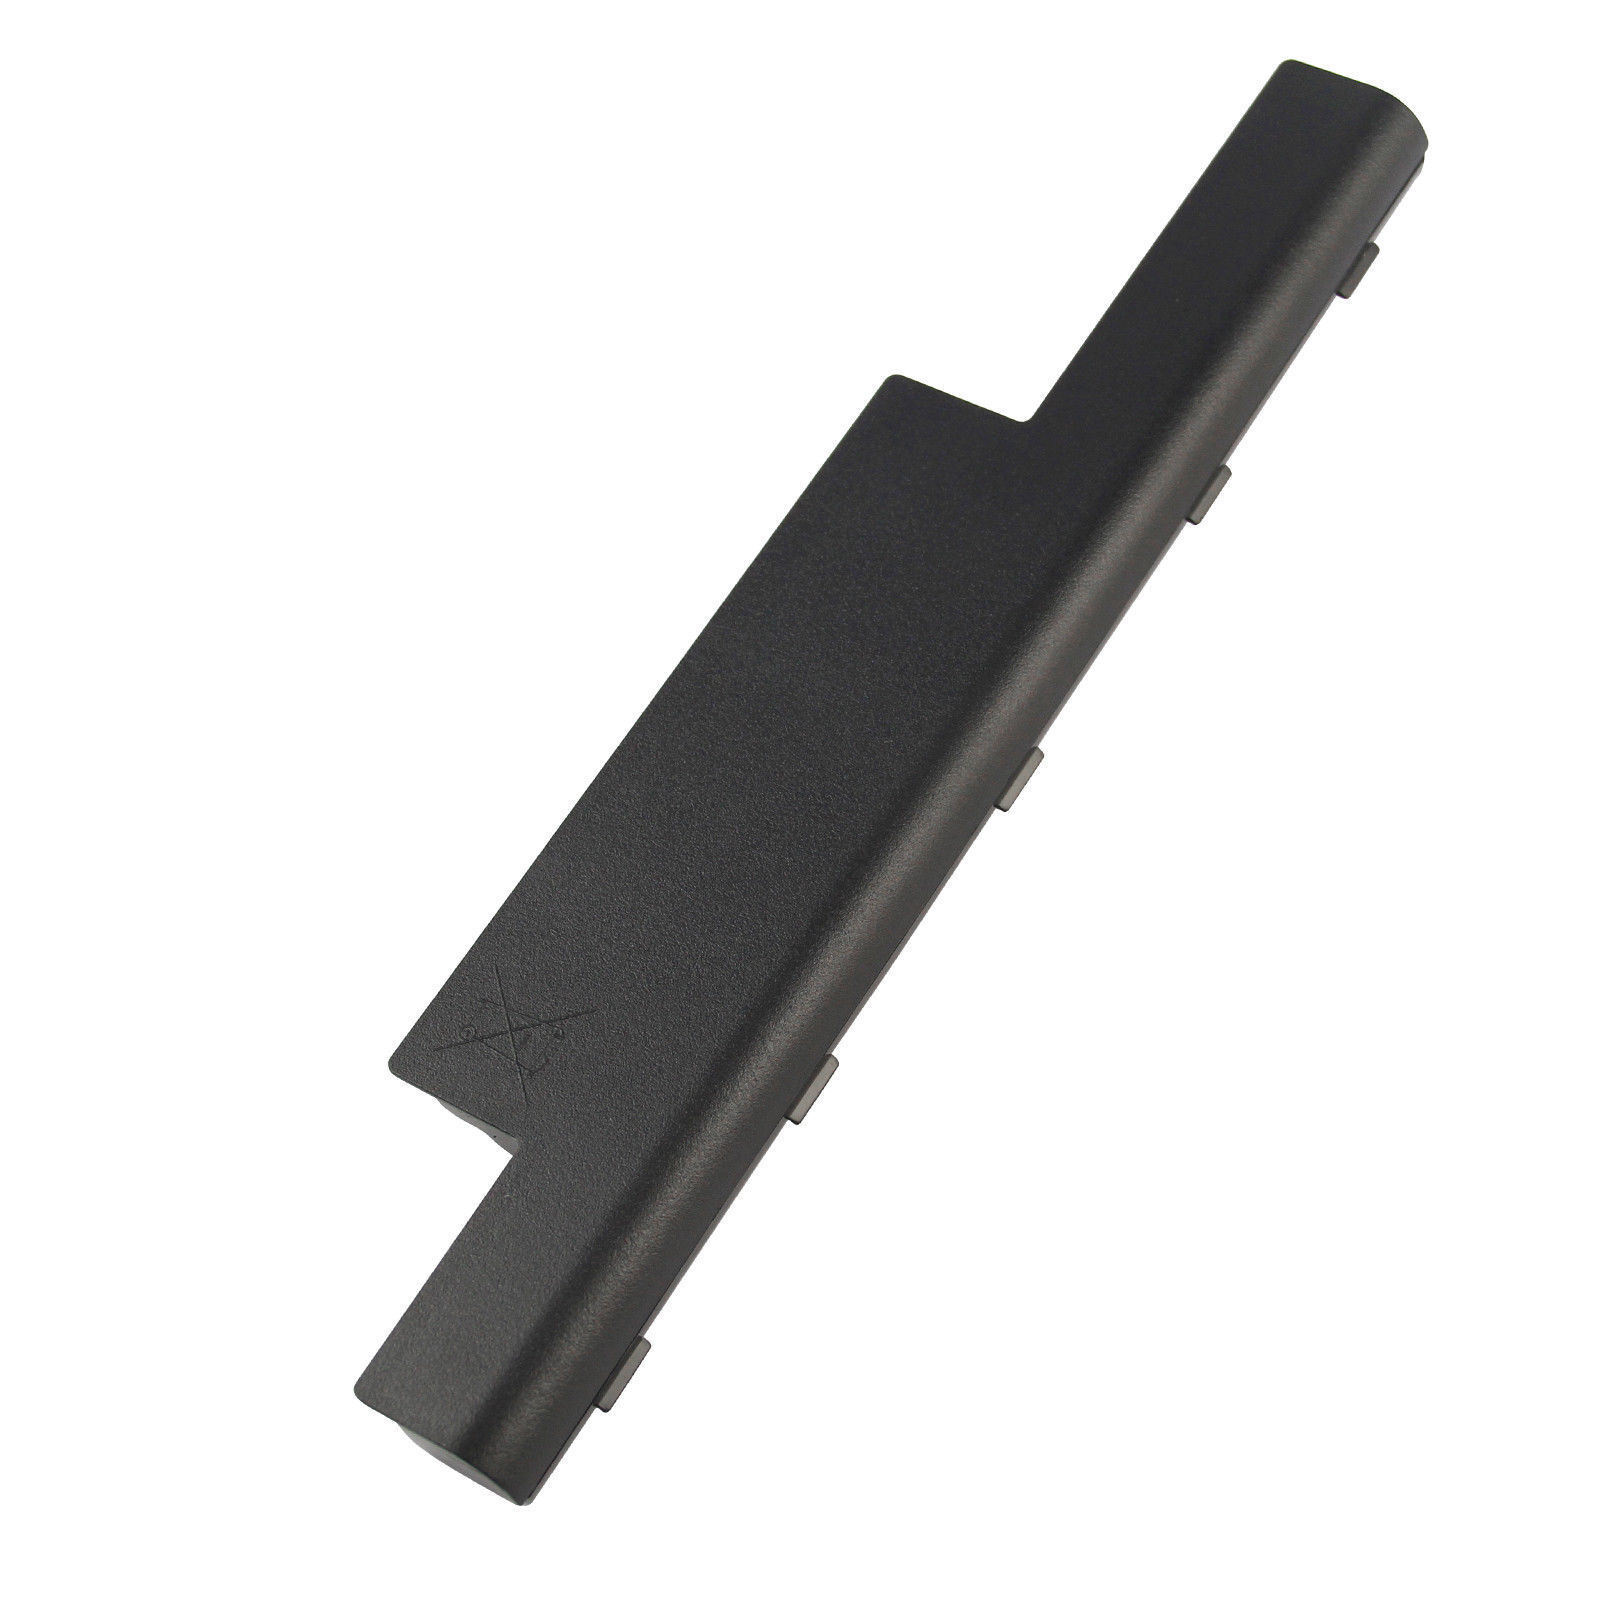 Great Choice Products Battery For Acer Aspire 4739 4741 4743 4749 4750 4752 4755 4771 5250 5251 5253 G